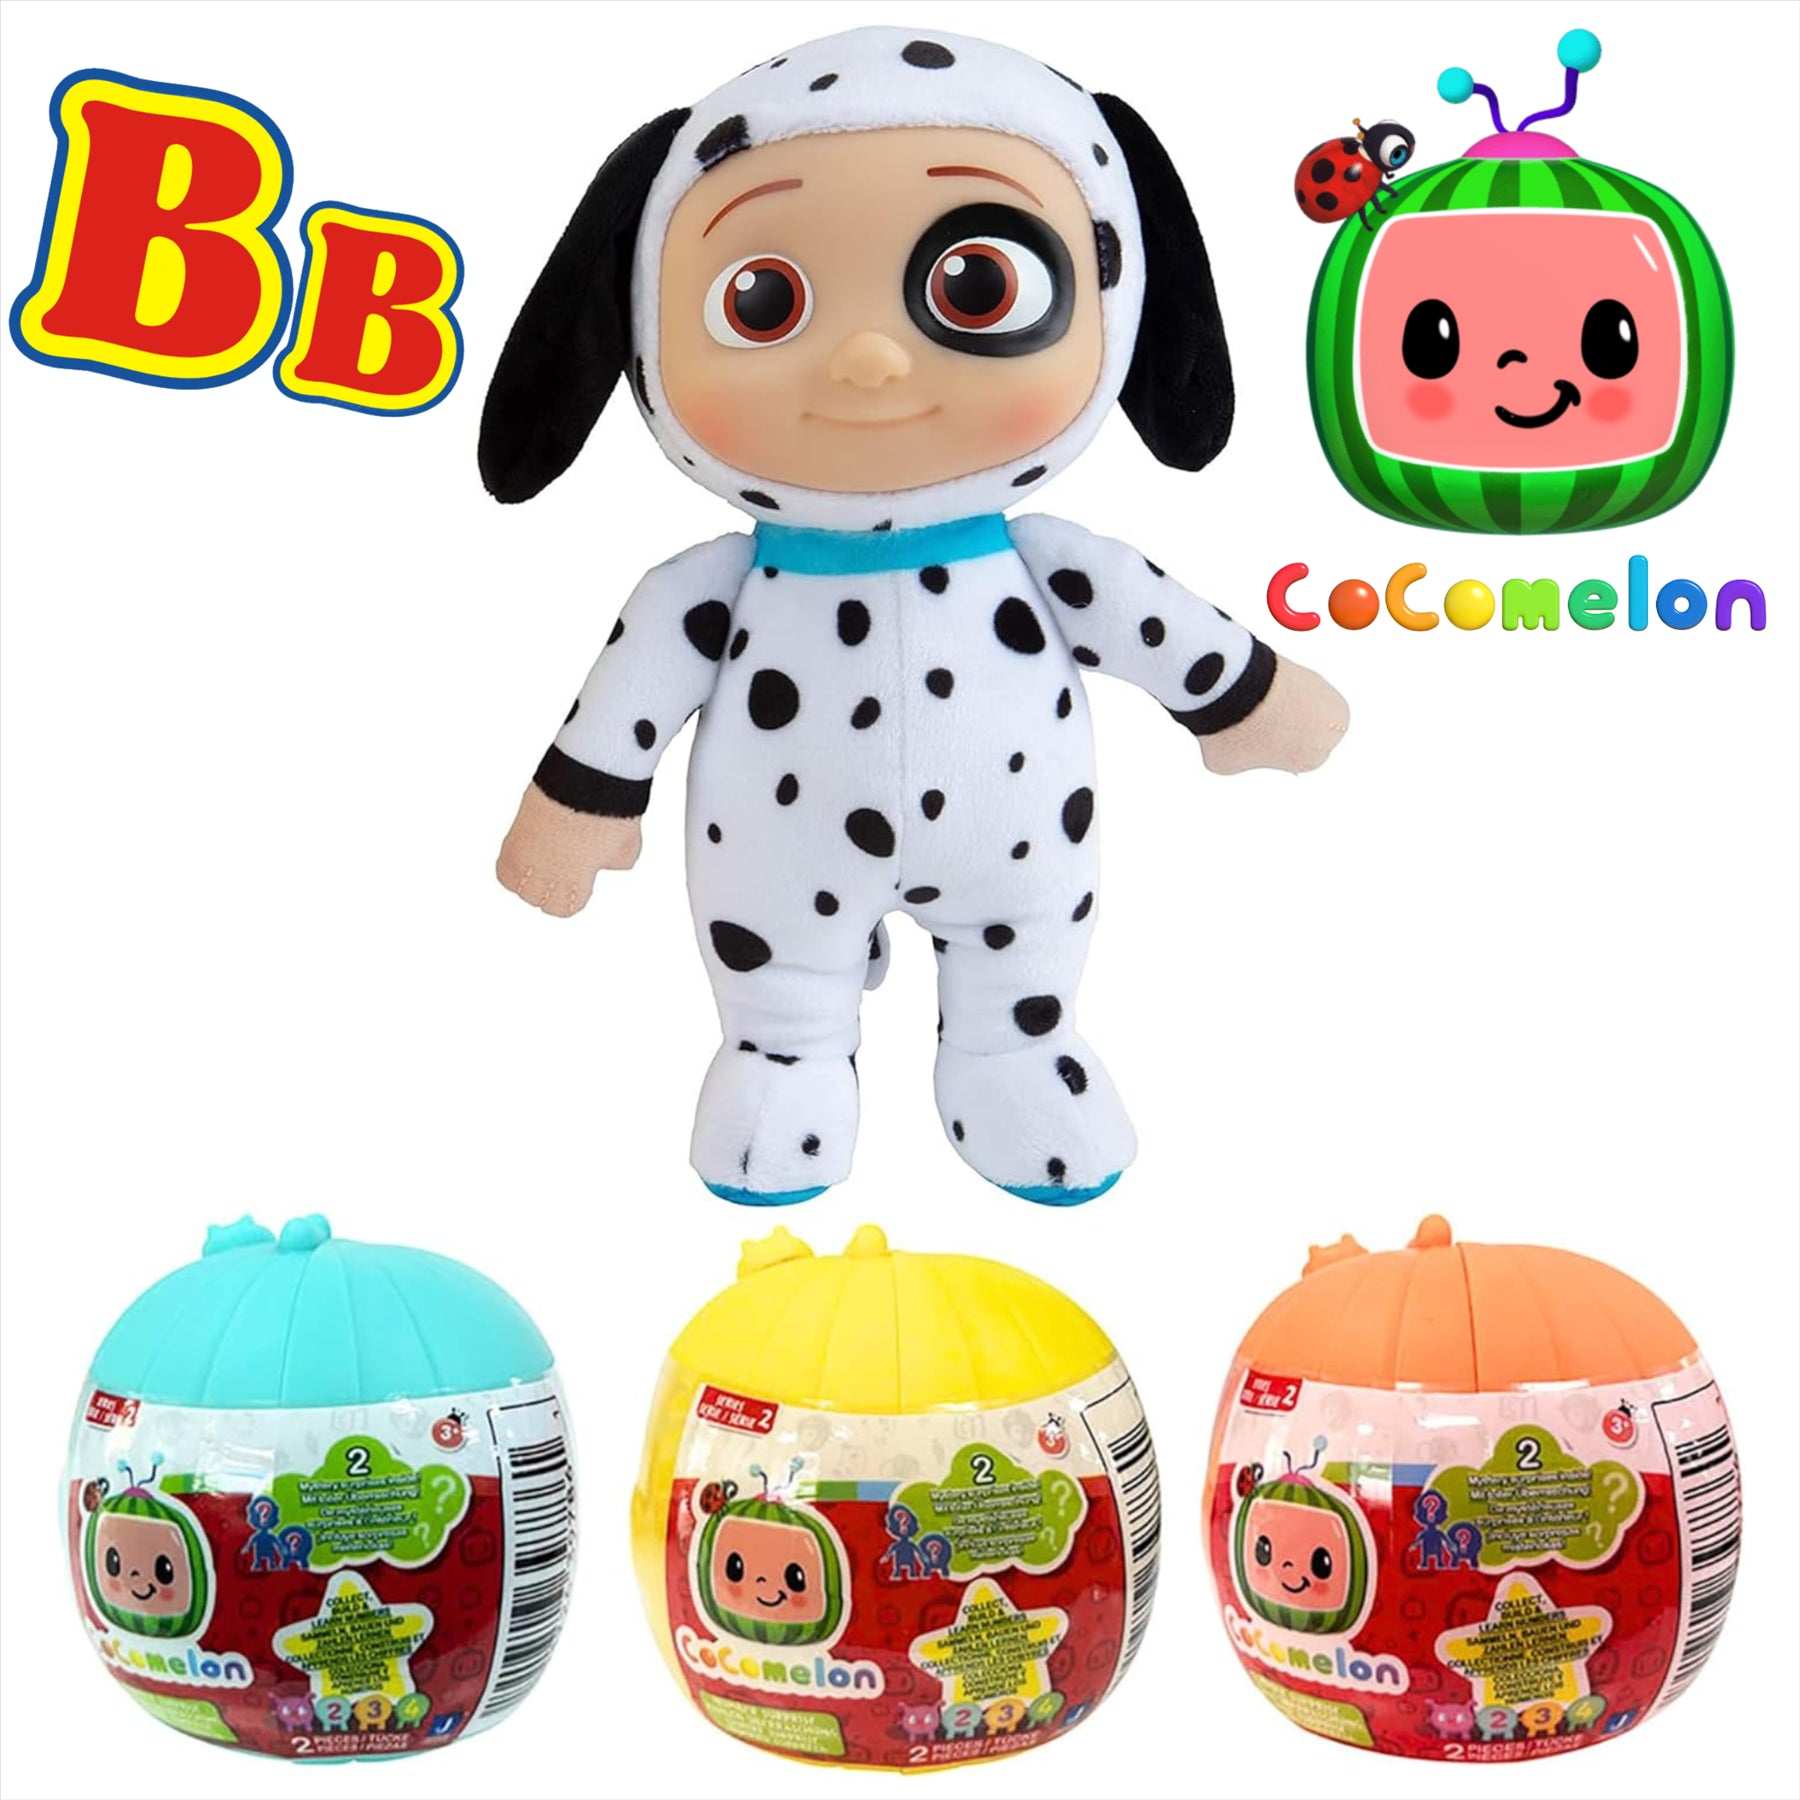 CoComelon Blind Capsule Number Character Articulated Figure Set - Puppy 20cm Plush and 3x Balls